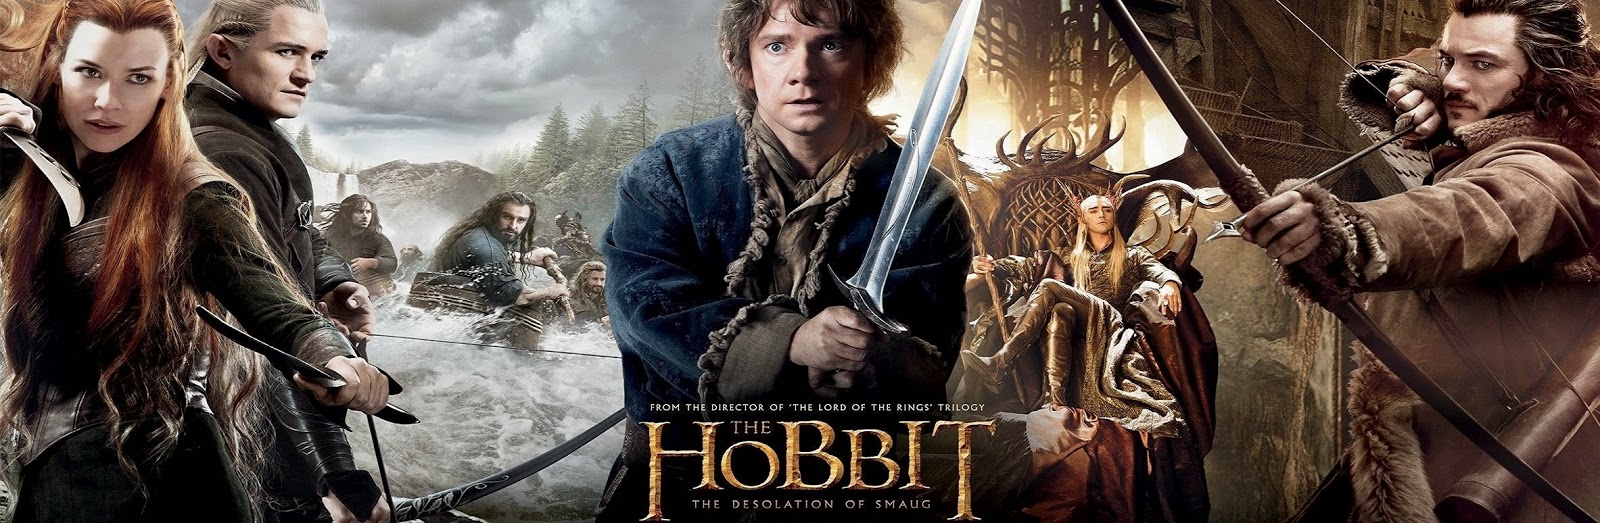 The Hobbit The Desolation Of Smaug Extended Edition 1080p 449